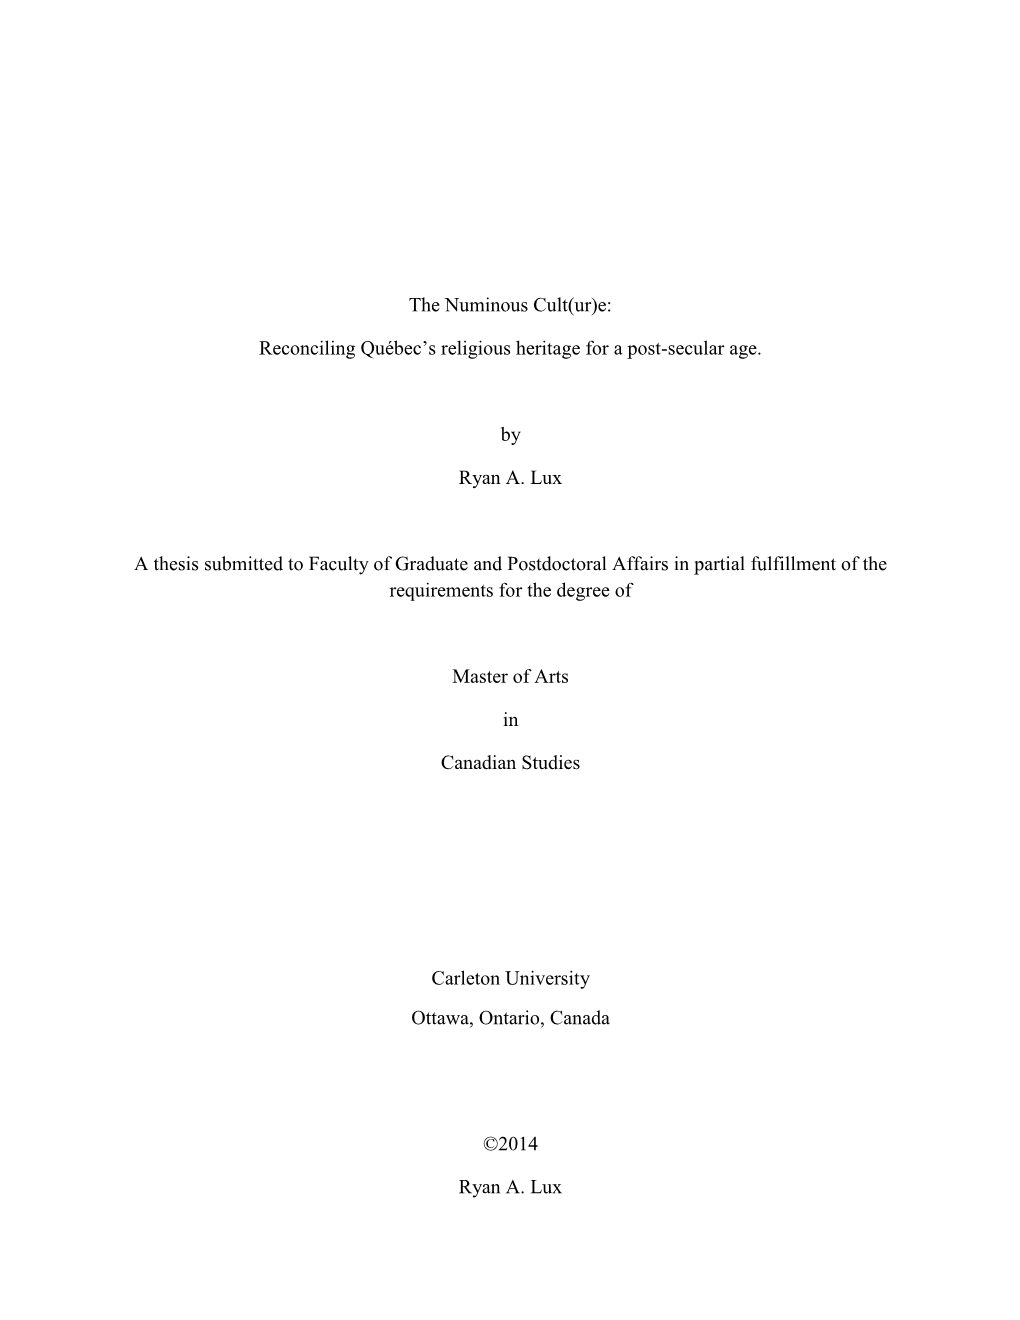 The Numinous Cult(Ur)E: Reconciling Québec's Religious Heritage for a Post-Secular Age. by Ryan A. Lux a Thesis Submitted To